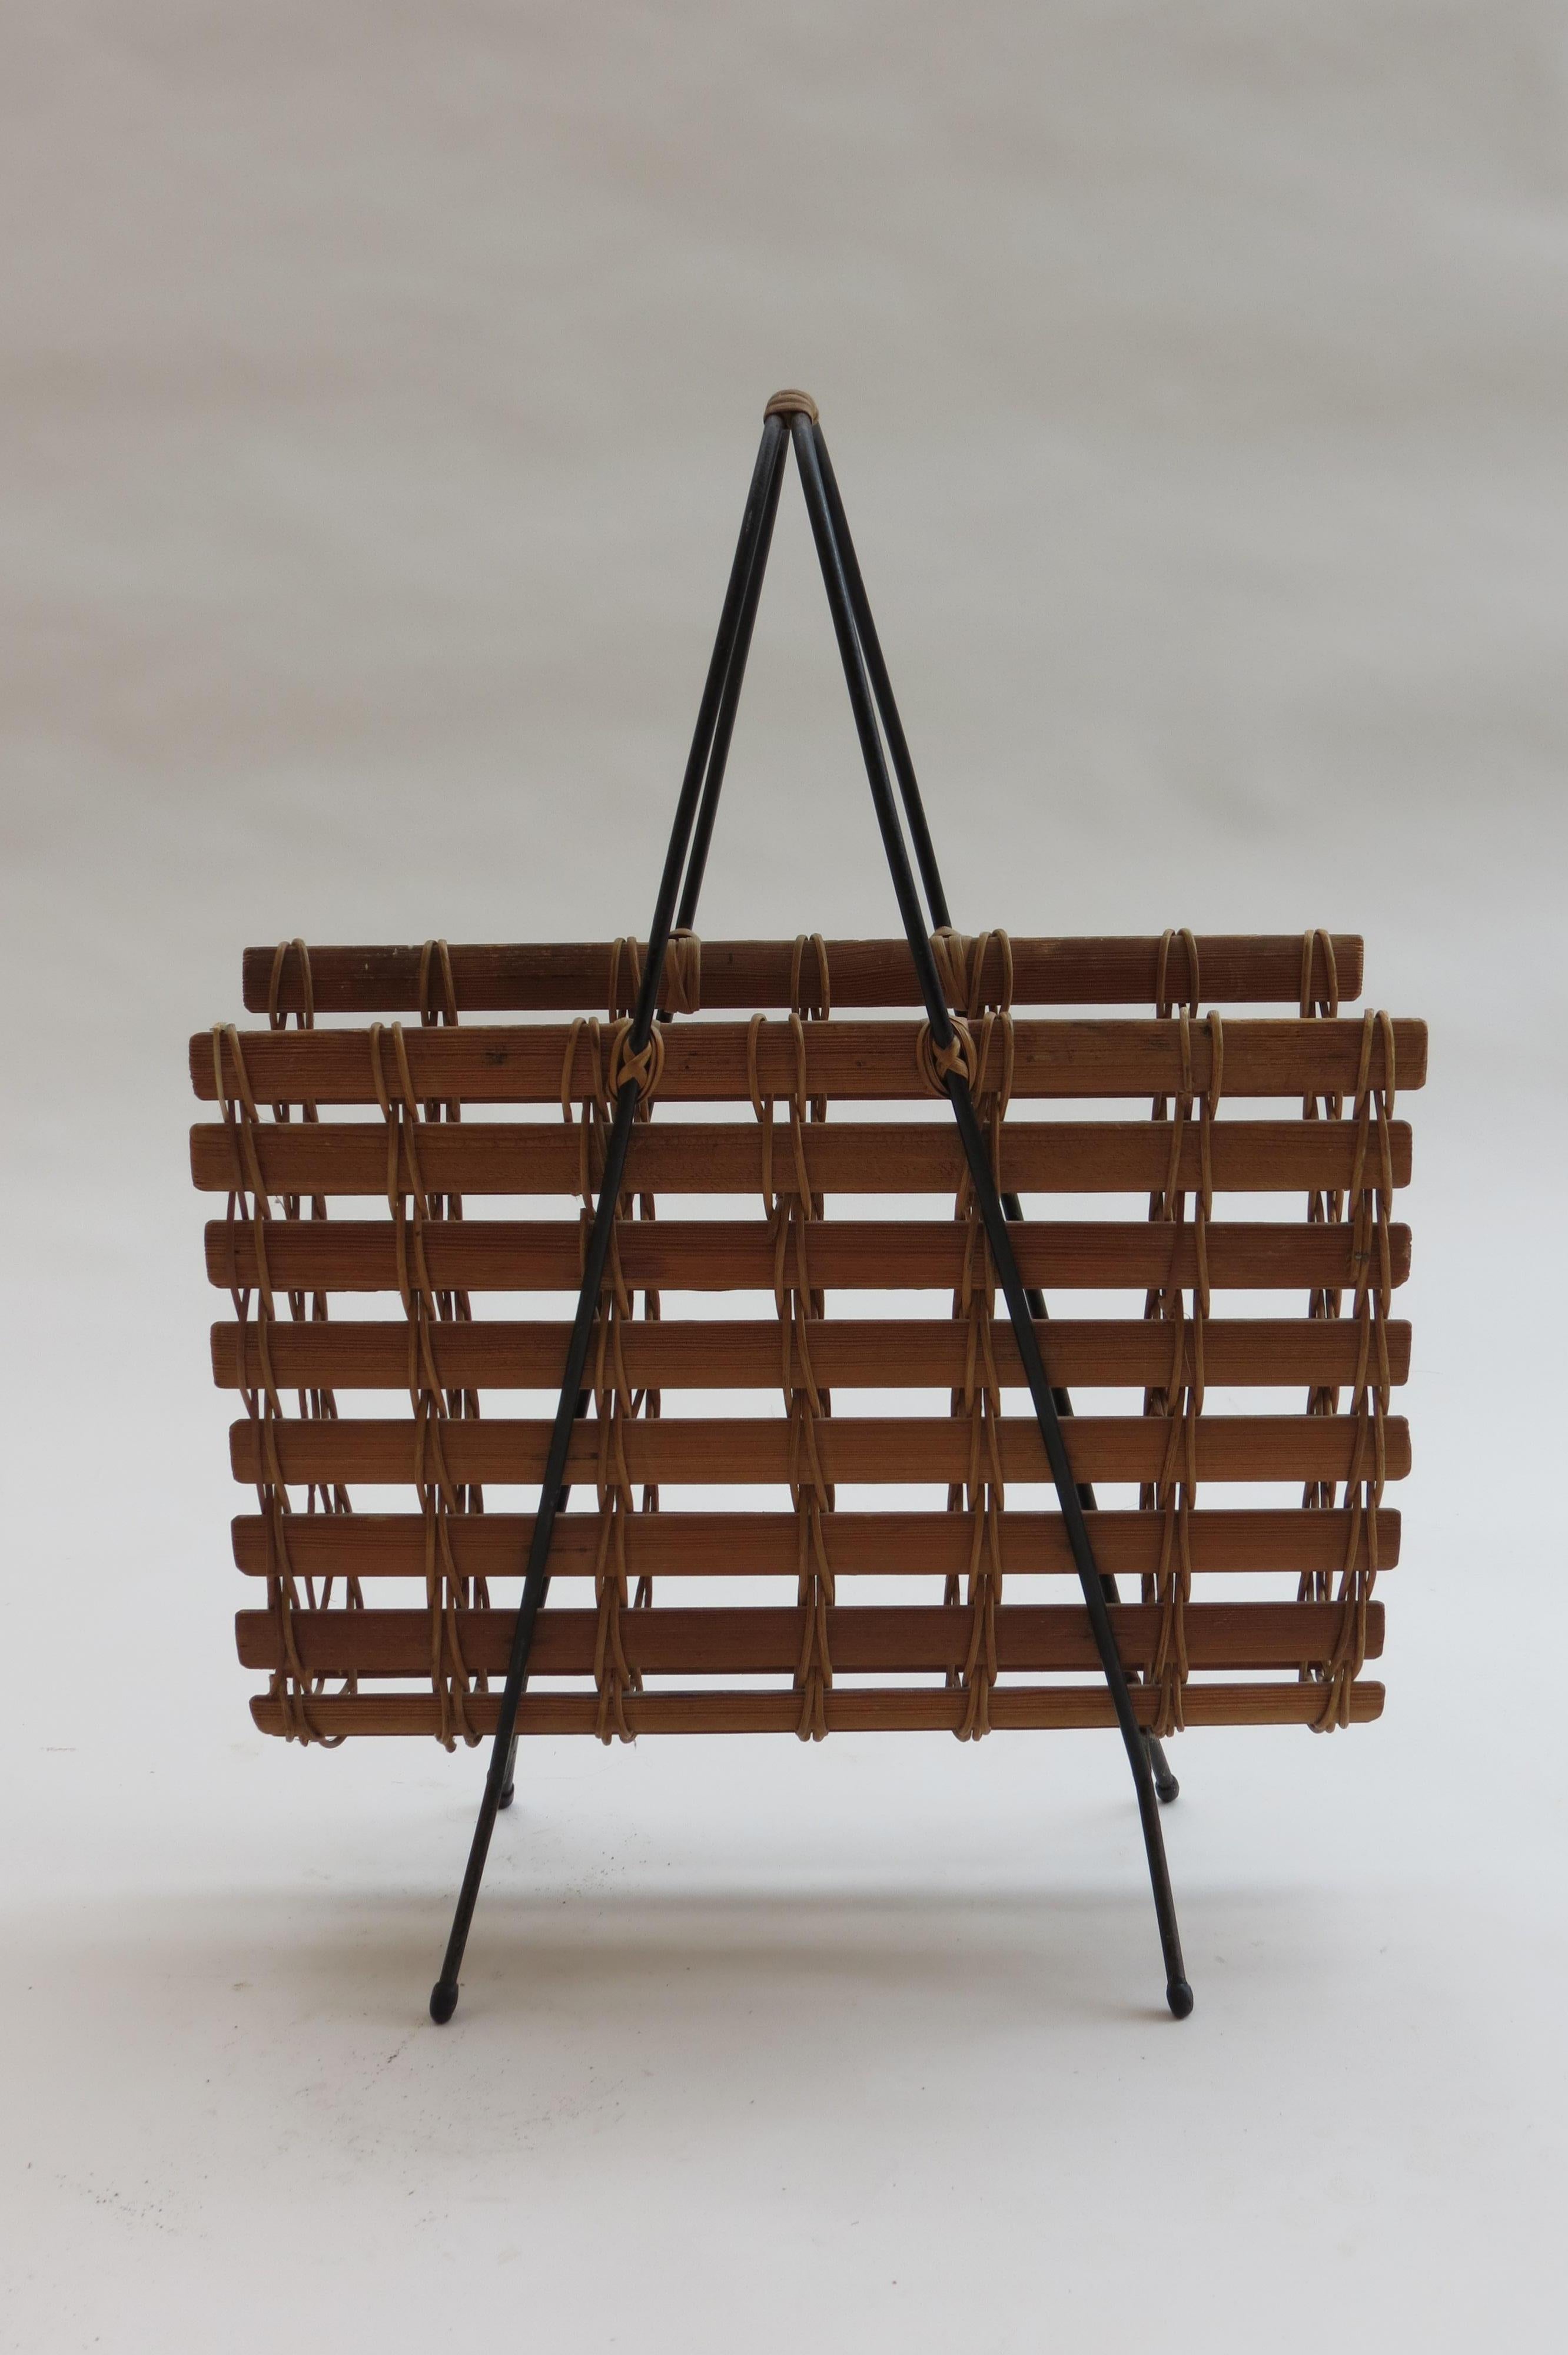 1950s stylish magazine rack made from pine shaped slats, held with rattan and a black painted steel frame with rubber feet.
Has a wrapped cane handle. Very stylish piece with Carl Auböck influence.
Could also be used in a bathroom for